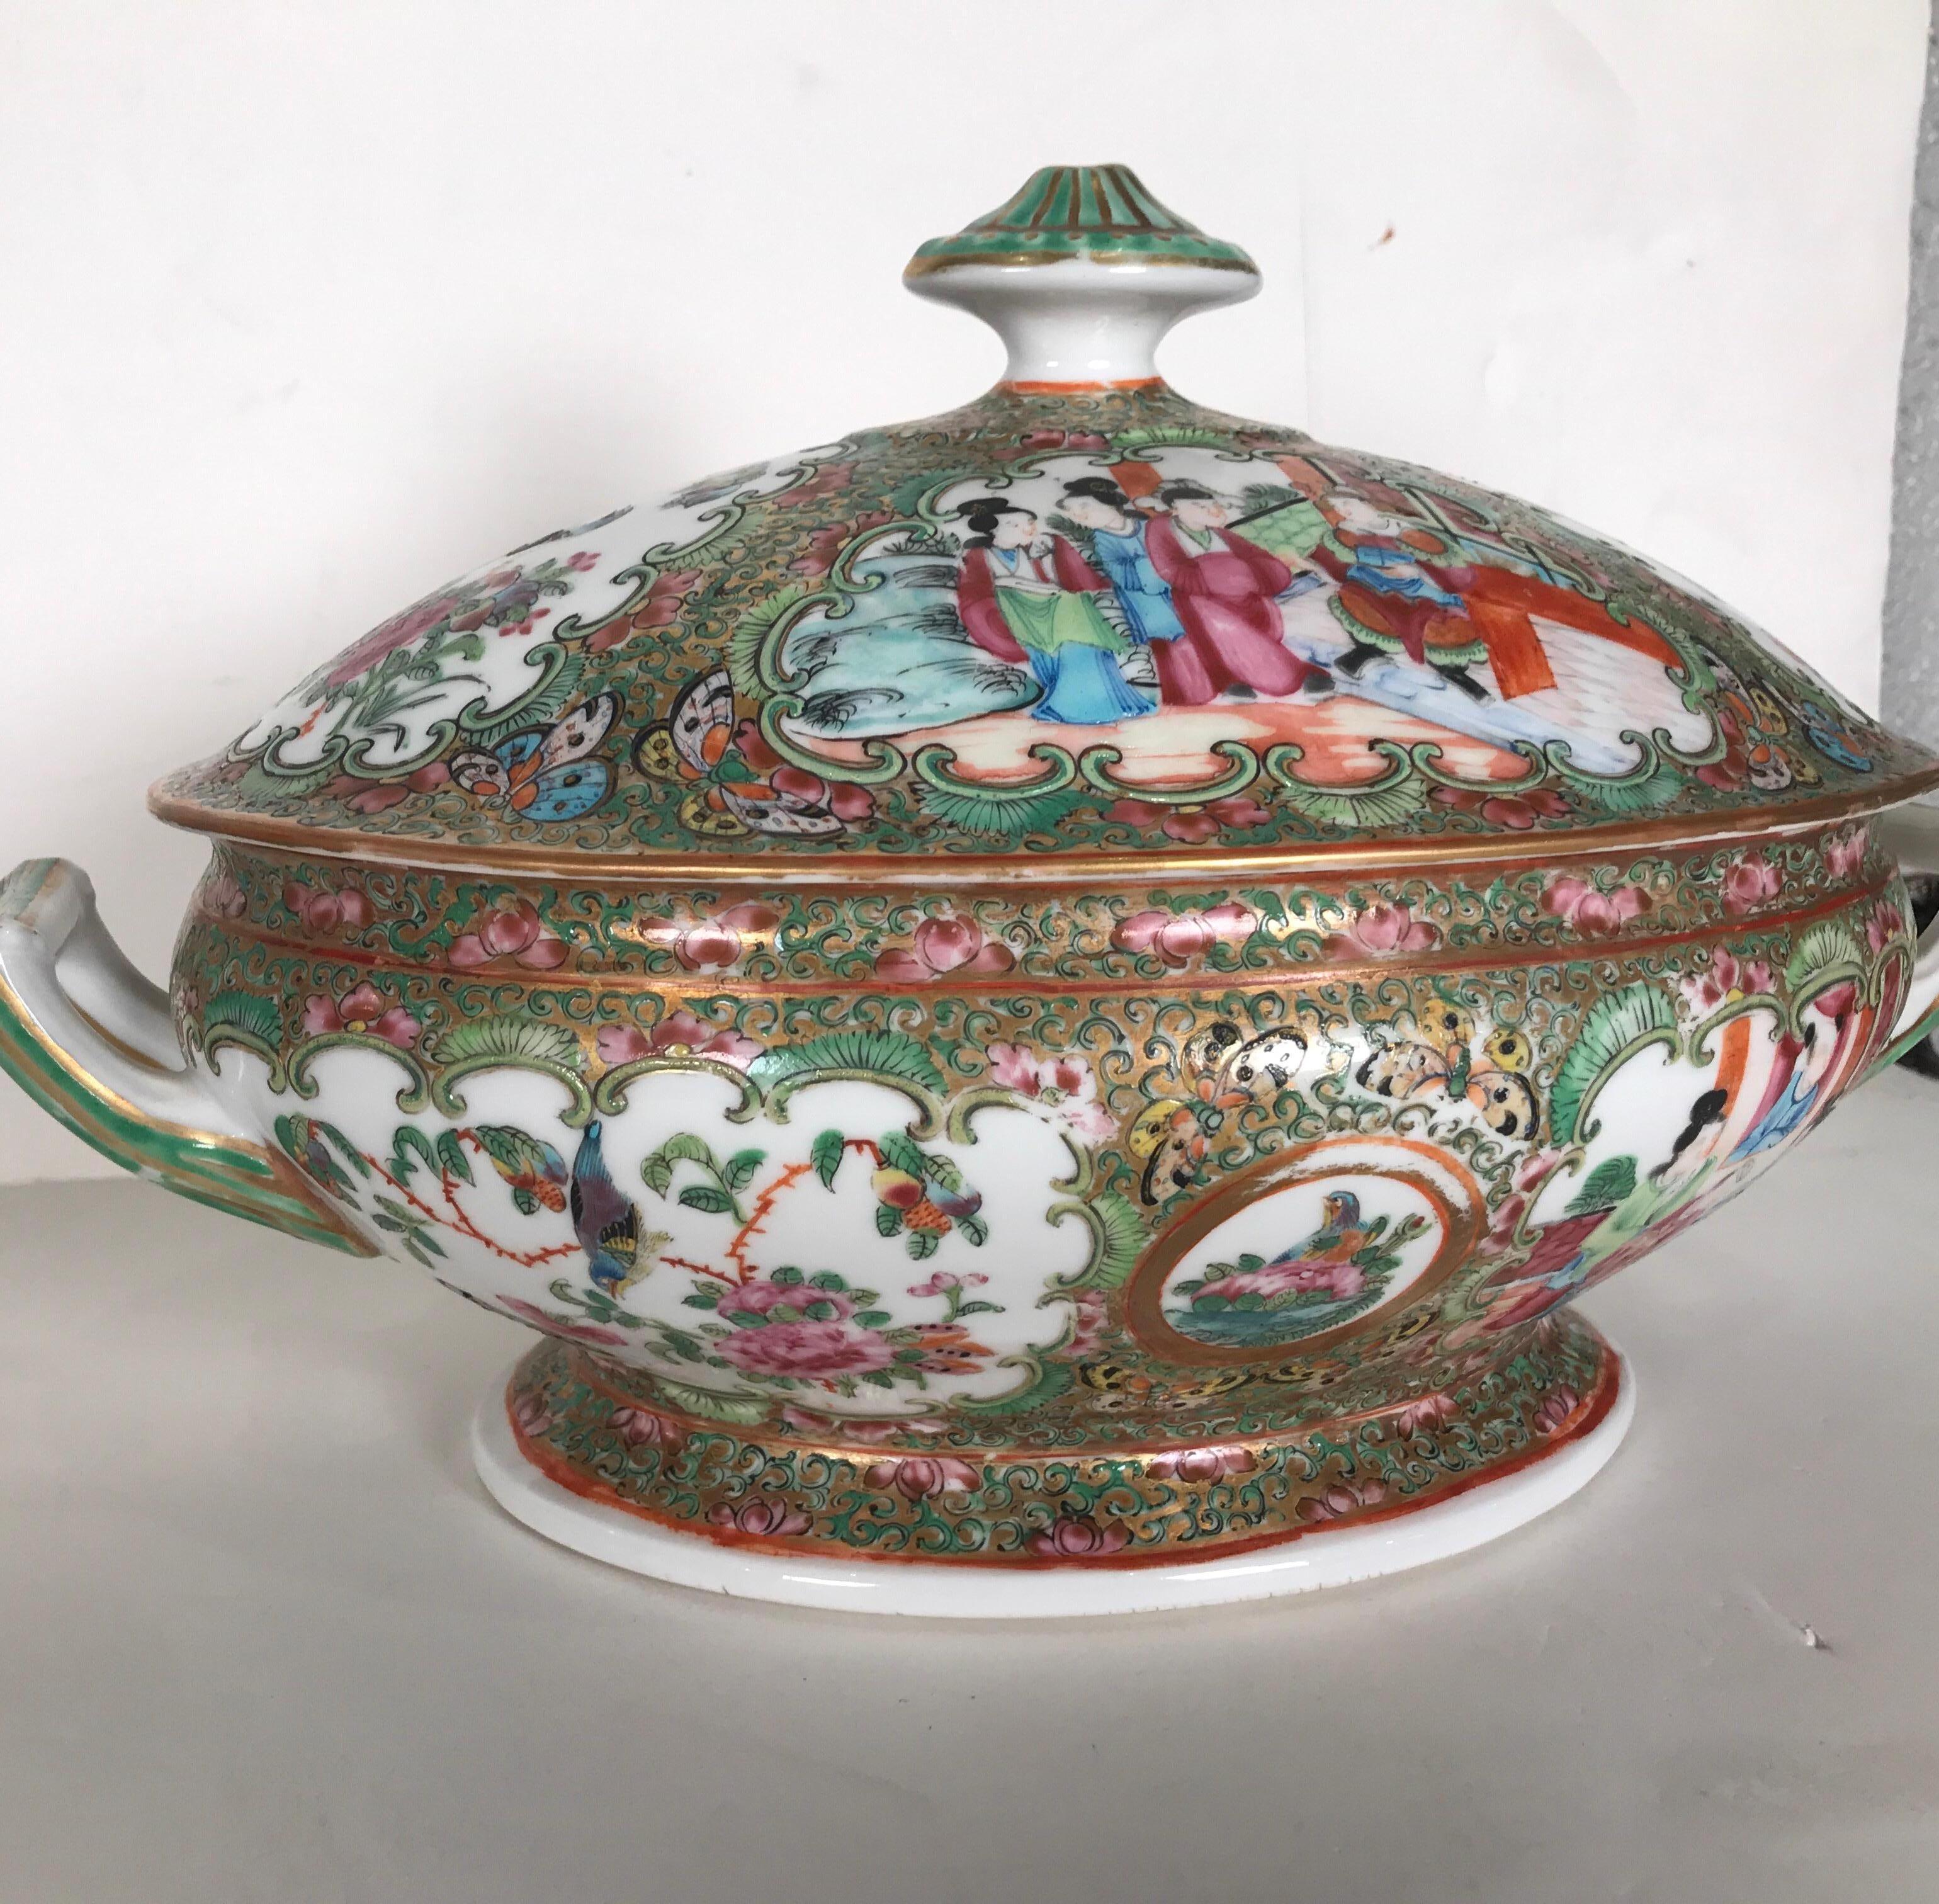 Exceptional quality mid-19th century Chinese export porcelain tureen. Hand painted all-over with typical robed figures, peonies and butterflies with a gilded background. The double handled form rests on a pedestal base and retains most of the